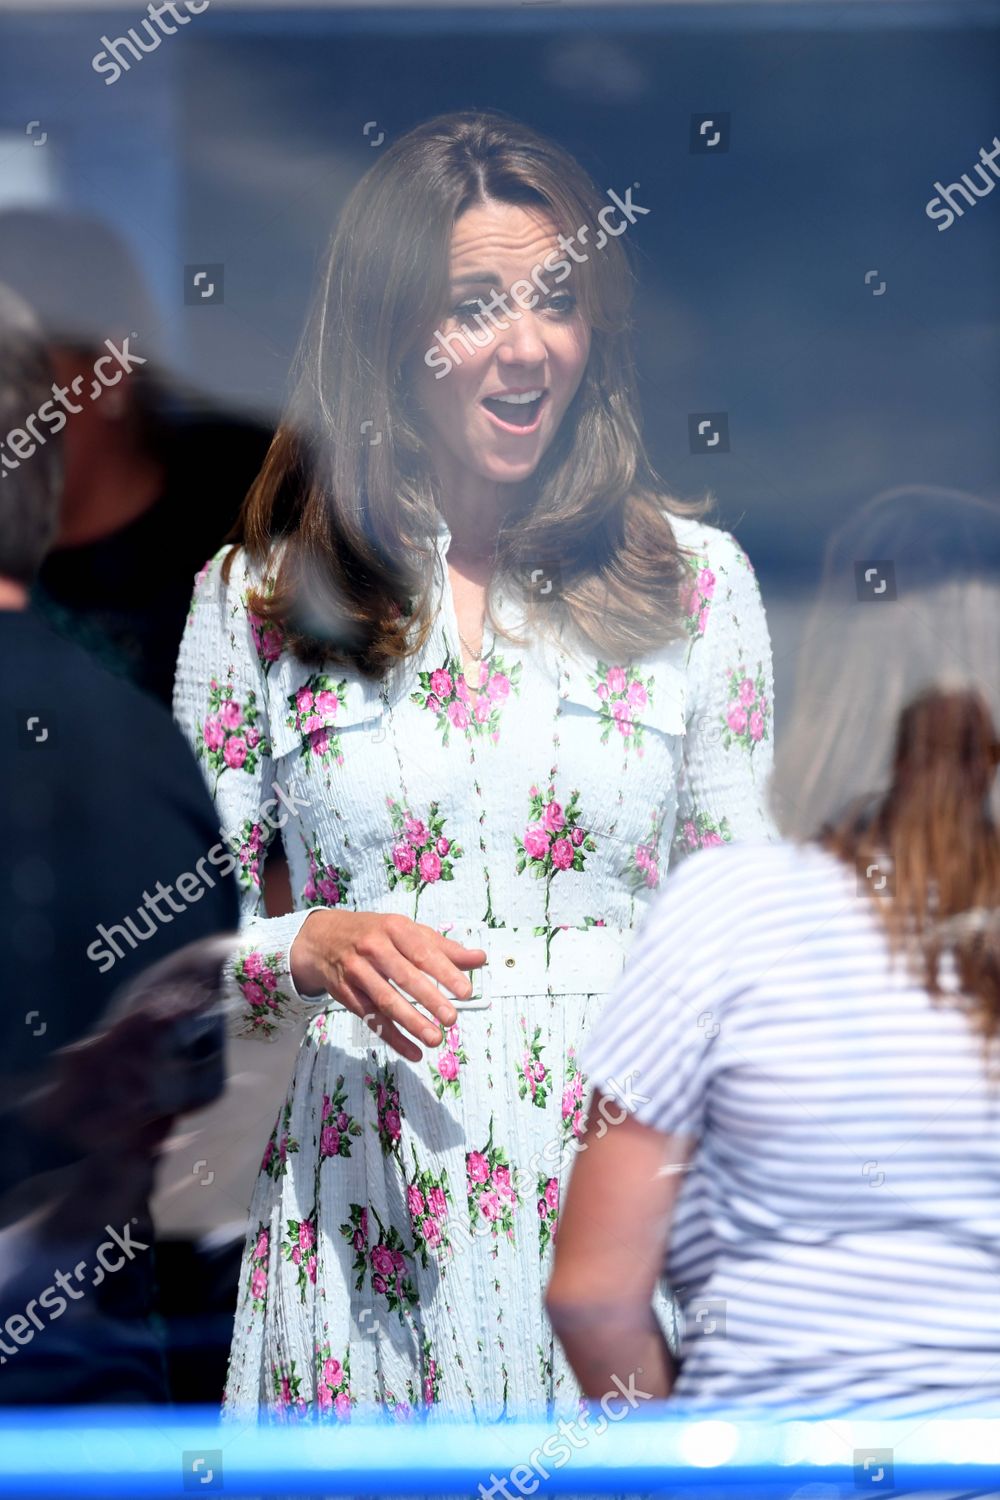 prince-william-and-catherine-duchess-of-cambridge-visit-to-barry-island-wales-uk-shutterstock-editorial-10733869ah.jpg